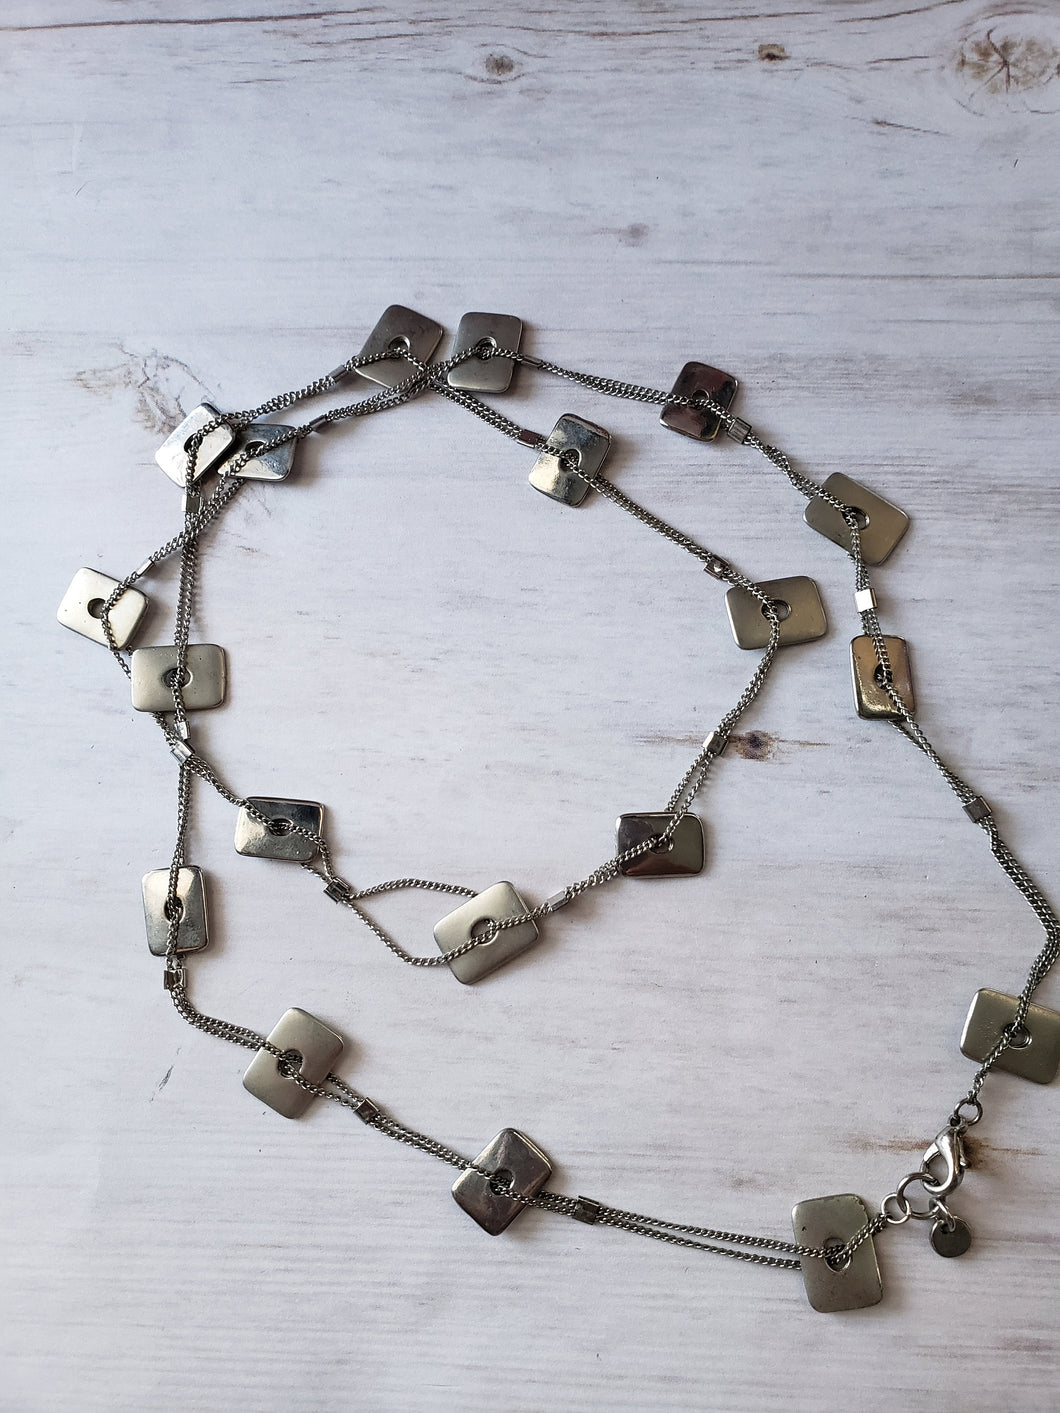 1980s Mexx Silver Tone Long Modern Necklace, Boho, Eclectic Vintage Fashion Jewelry